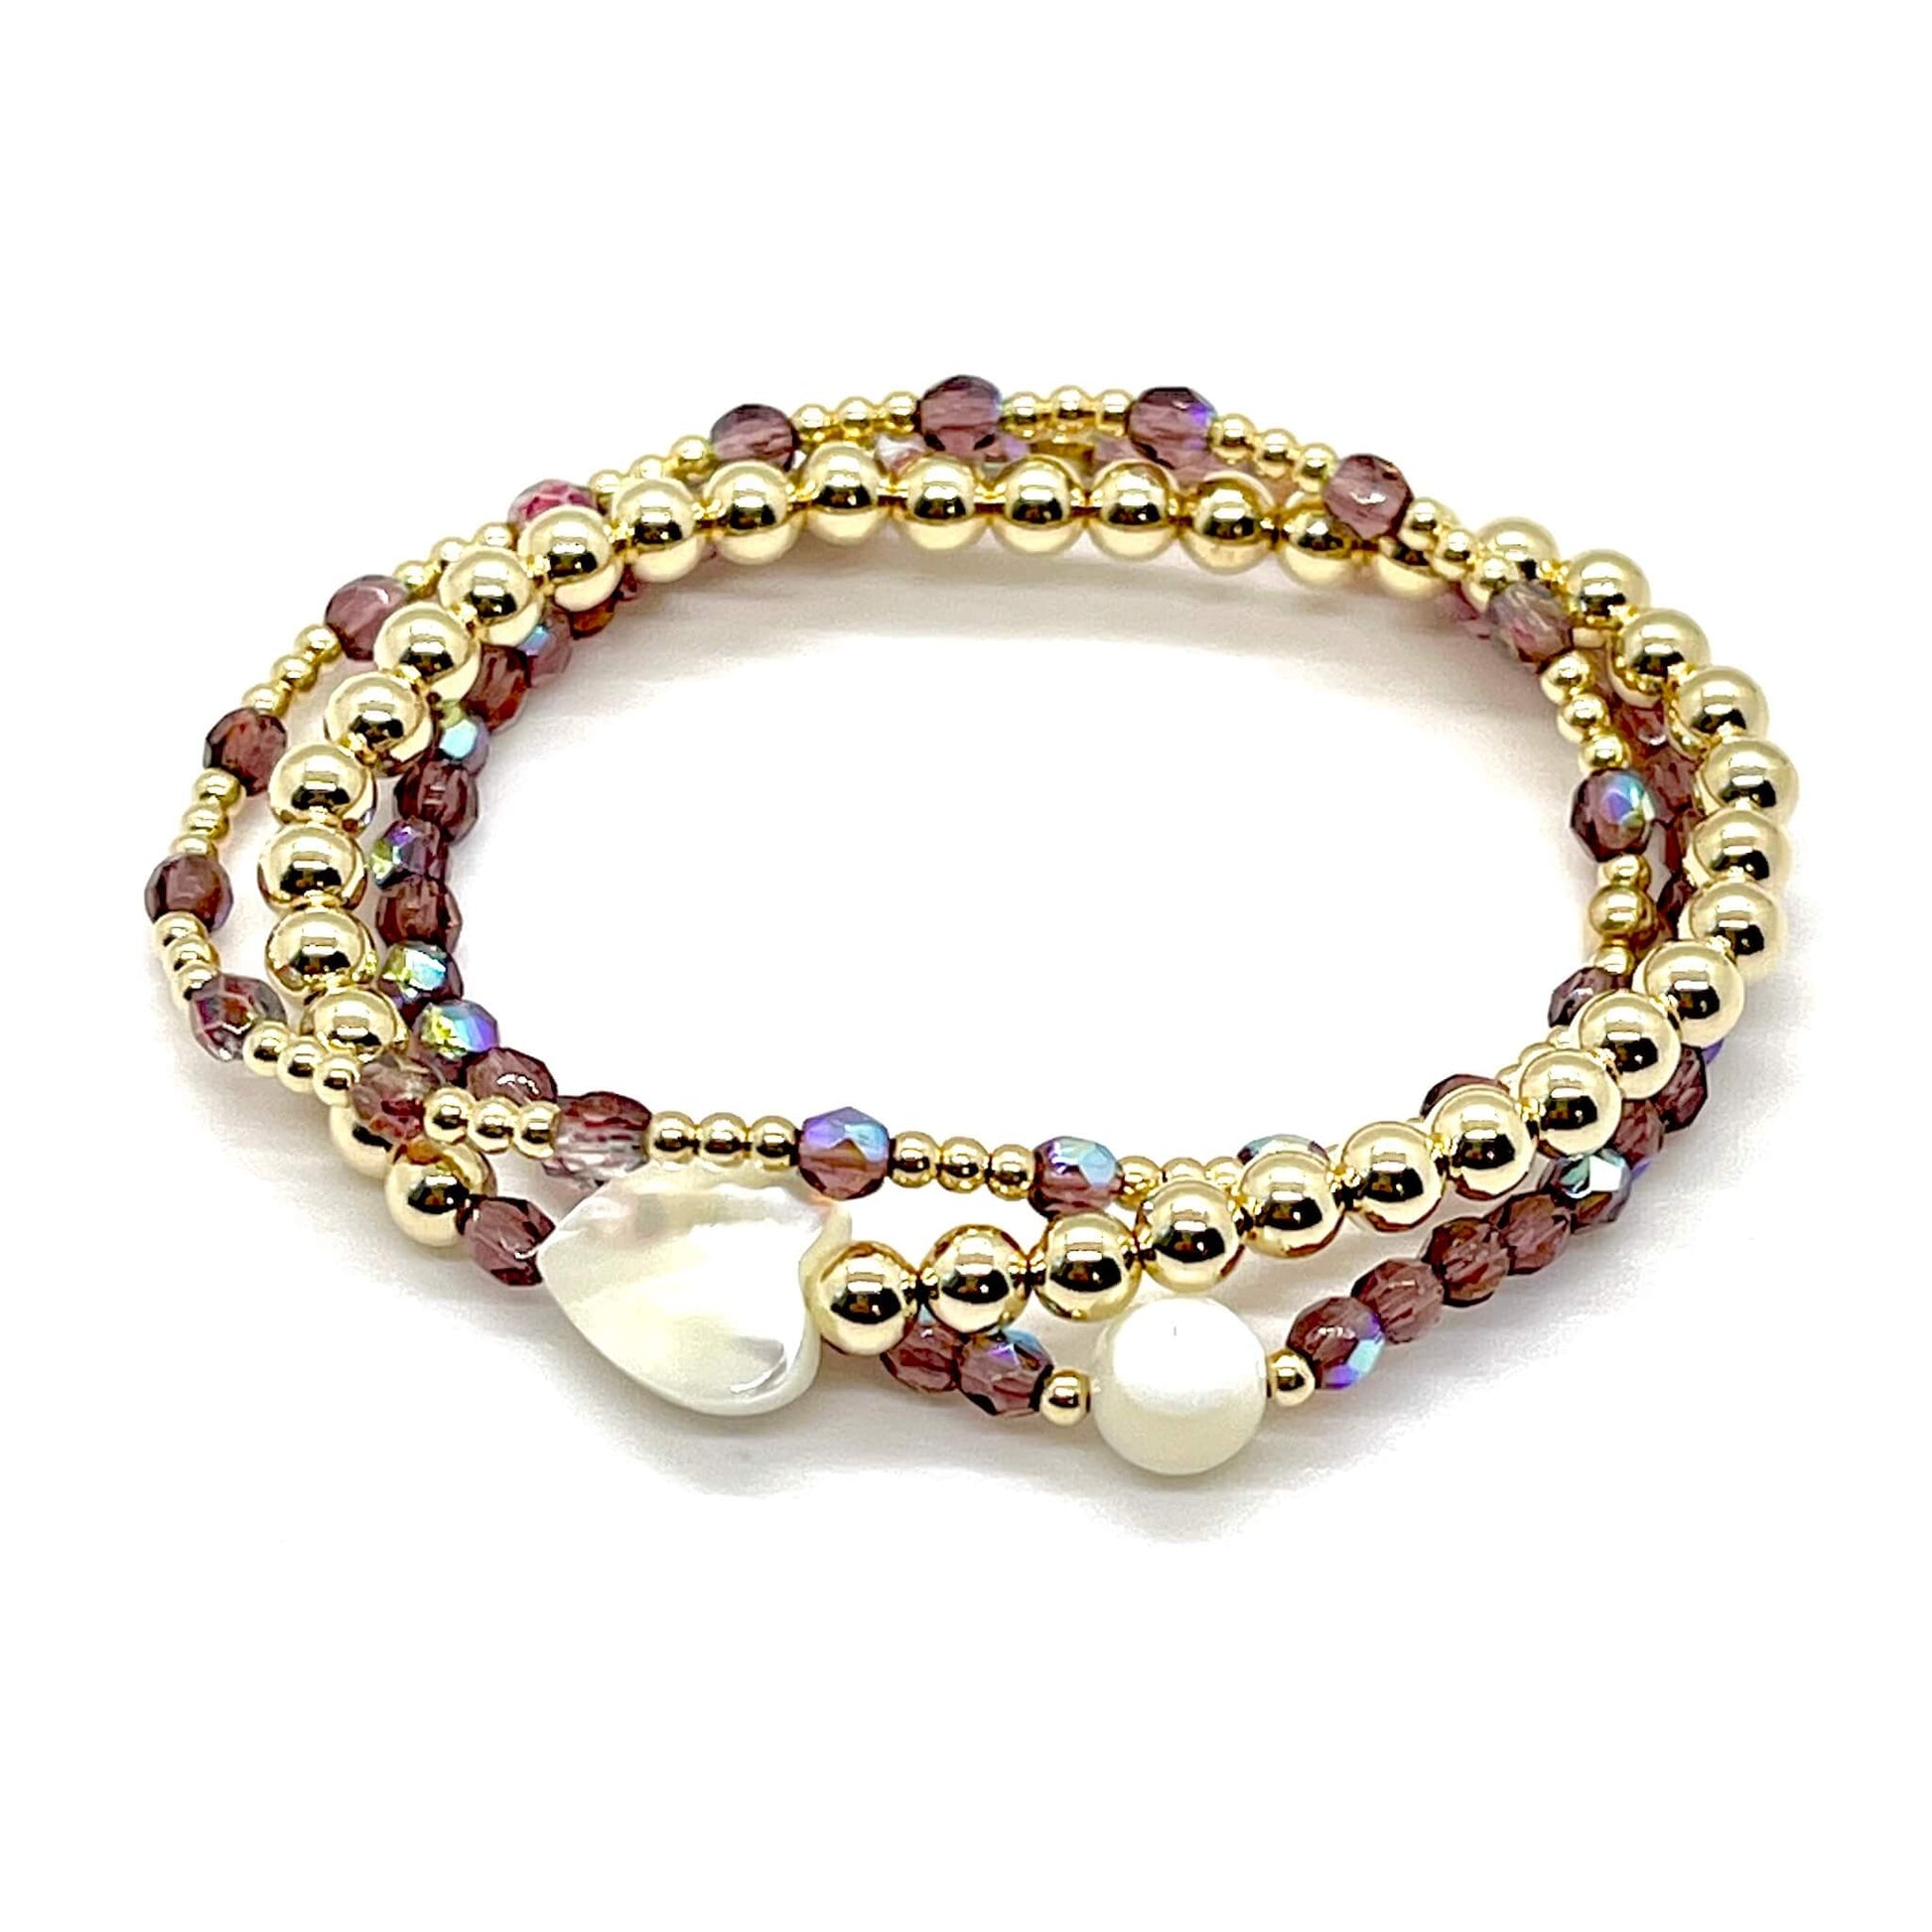 Bridesmaid bracelet gift. Amethyst crystals, 14K gold filled beads, and heart and round mother-of-pearl beads on elastic stretch cord.